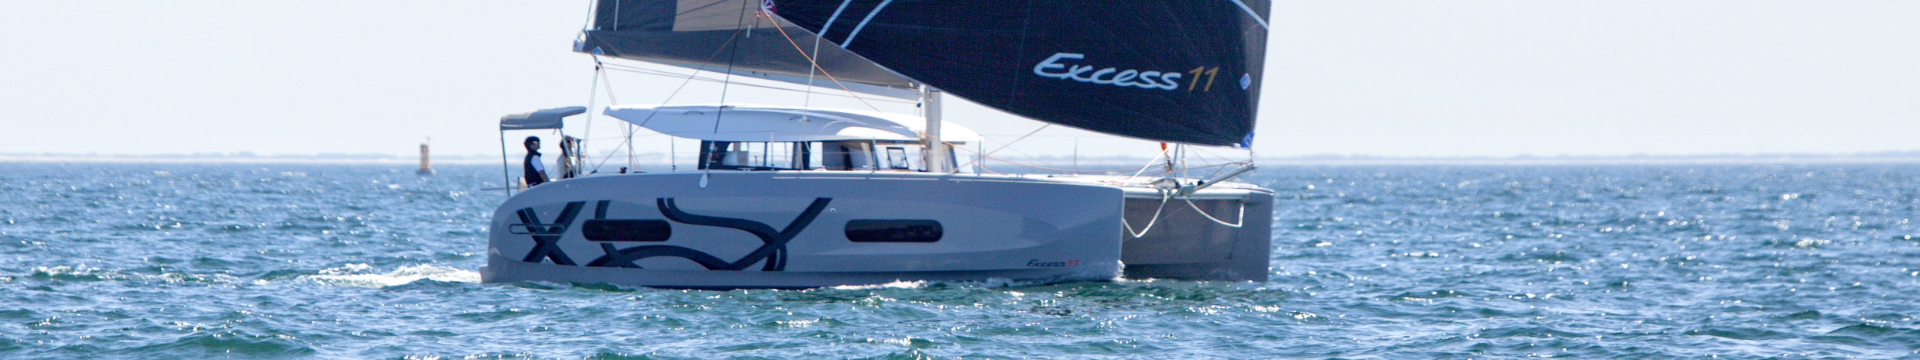 Excess 11 MOANA IBIZA BAREBOAT Main picture for the desktop